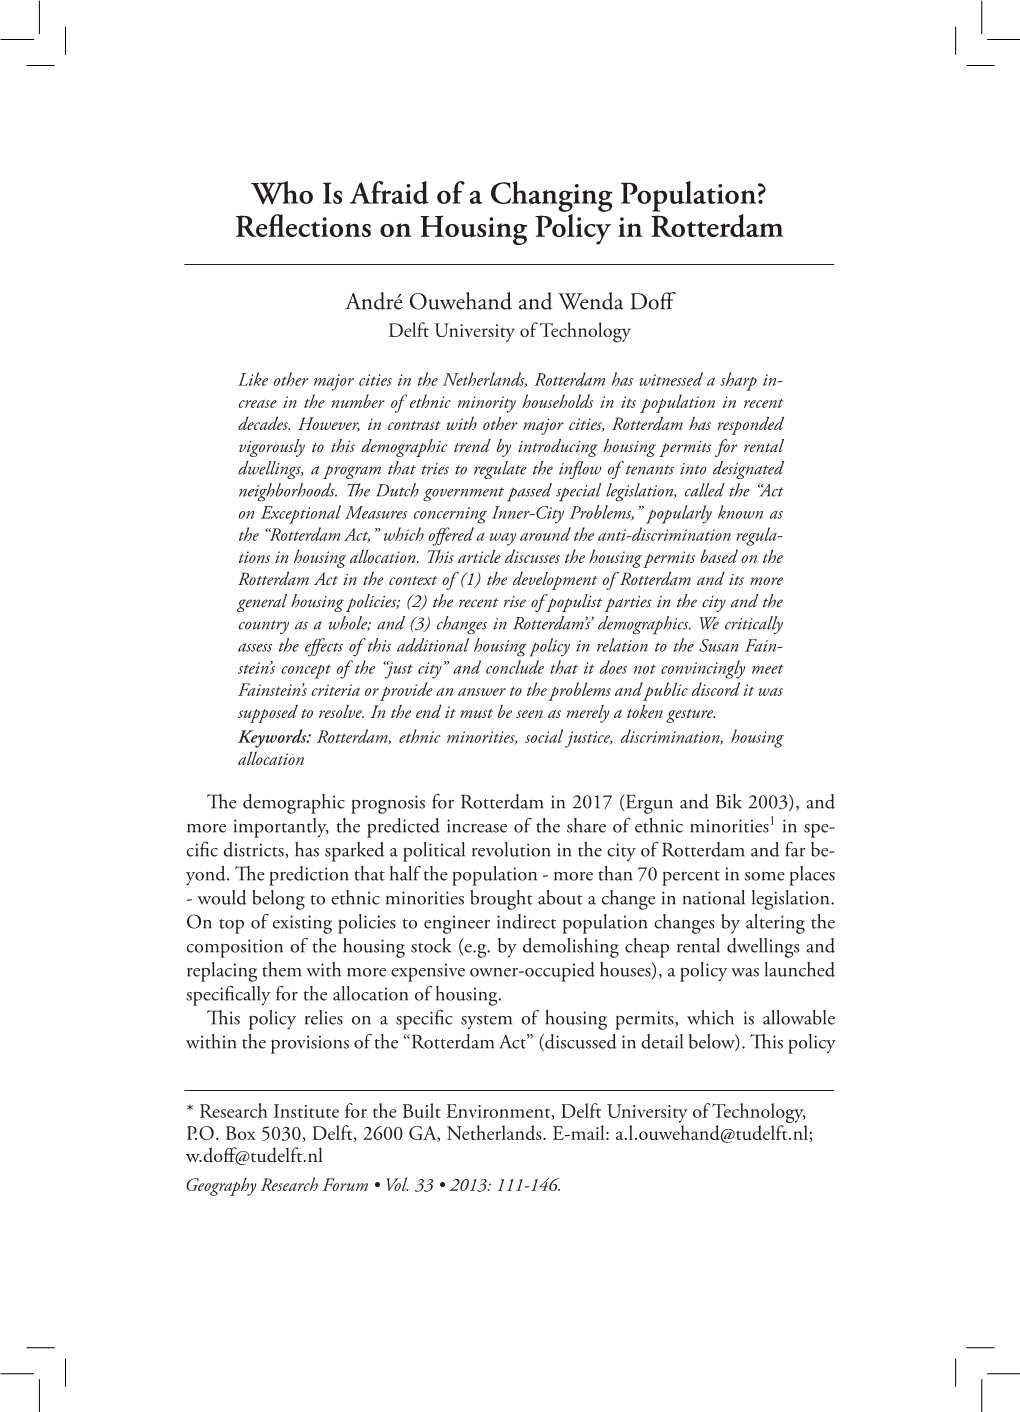 Reflections on Housing Policy in Rotterdam